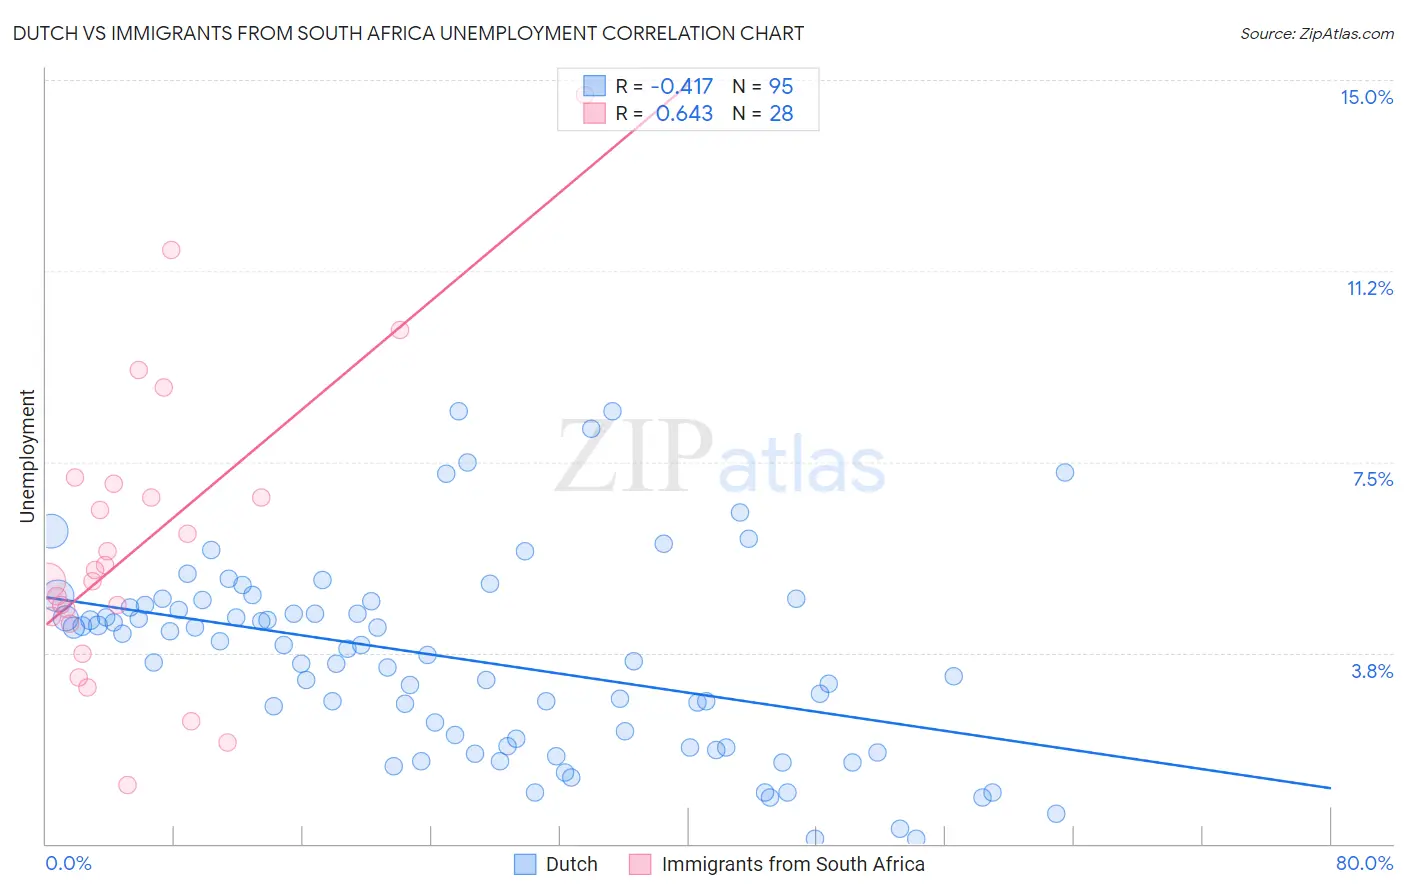 Dutch vs Immigrants from South Africa Unemployment